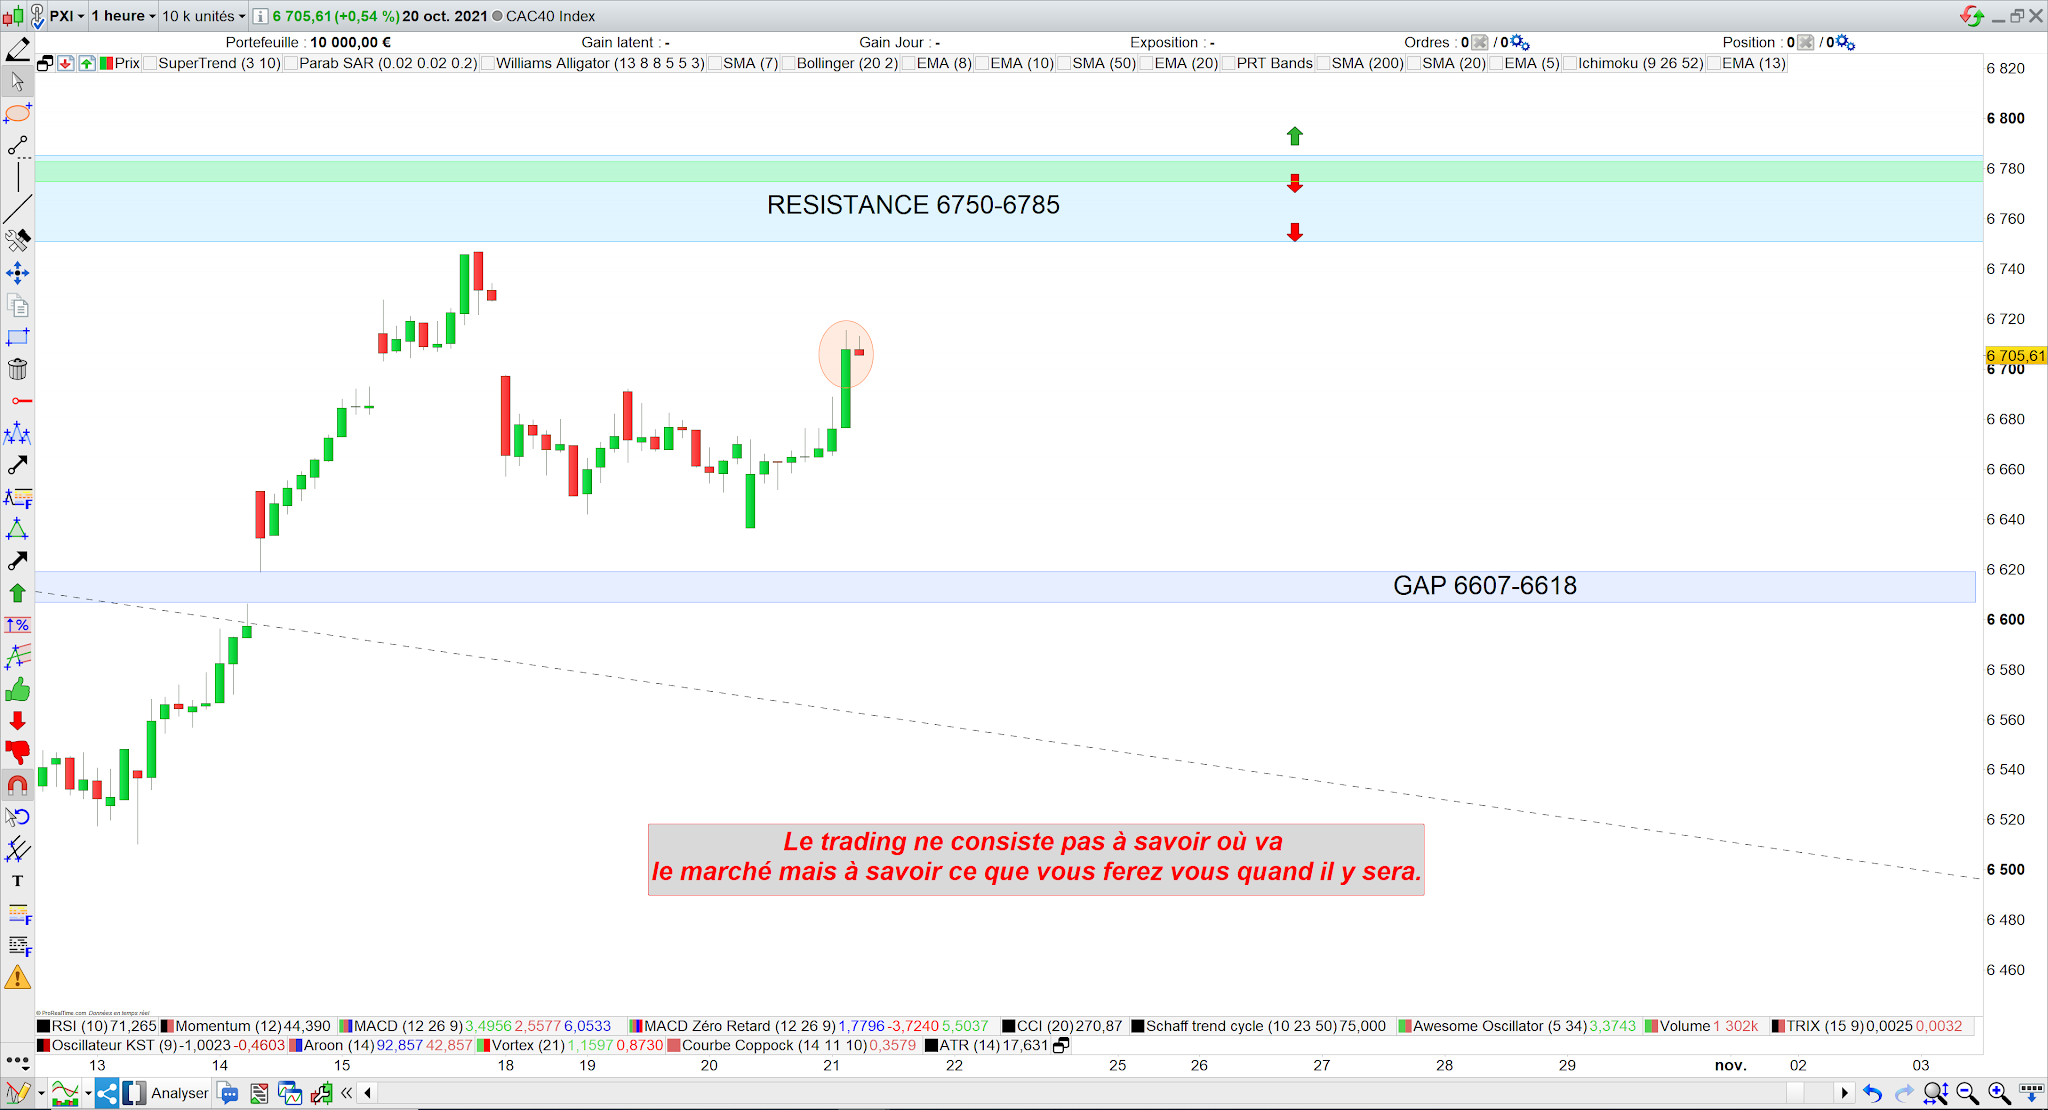 Trading cac40 21/10/21